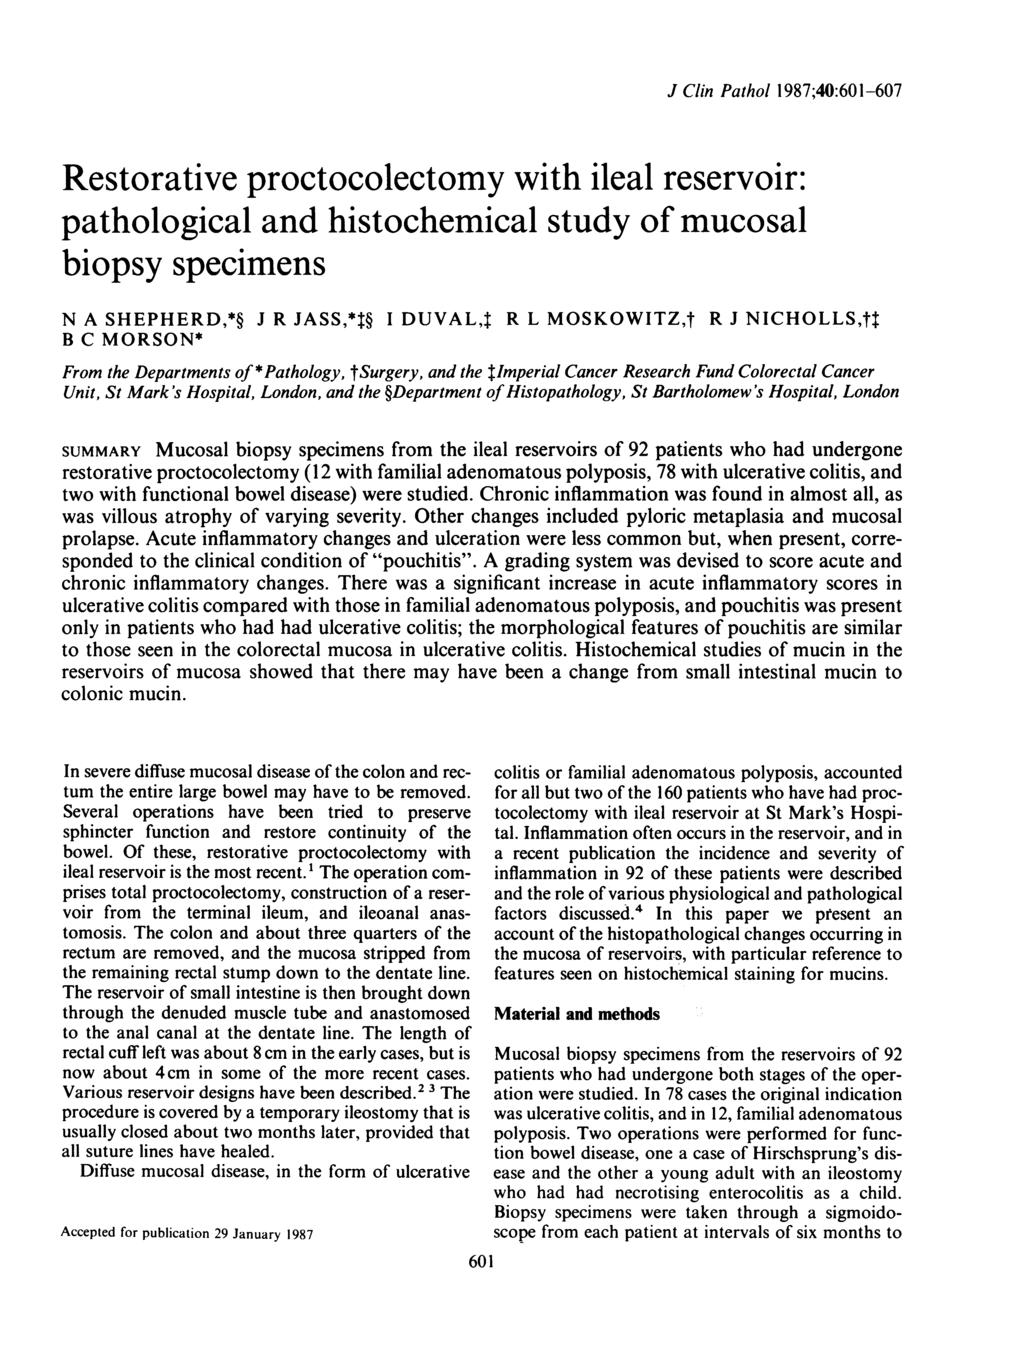 J Clin Pathol 1987;40:601-607 Restorative proctocolectomy with ileal reservoir: pathological and histochemical study of mucosal biopsy specimens N A SHEPHERD,* J R JASS,*t I DUVAL,T R L MOSKOWITZ,t R